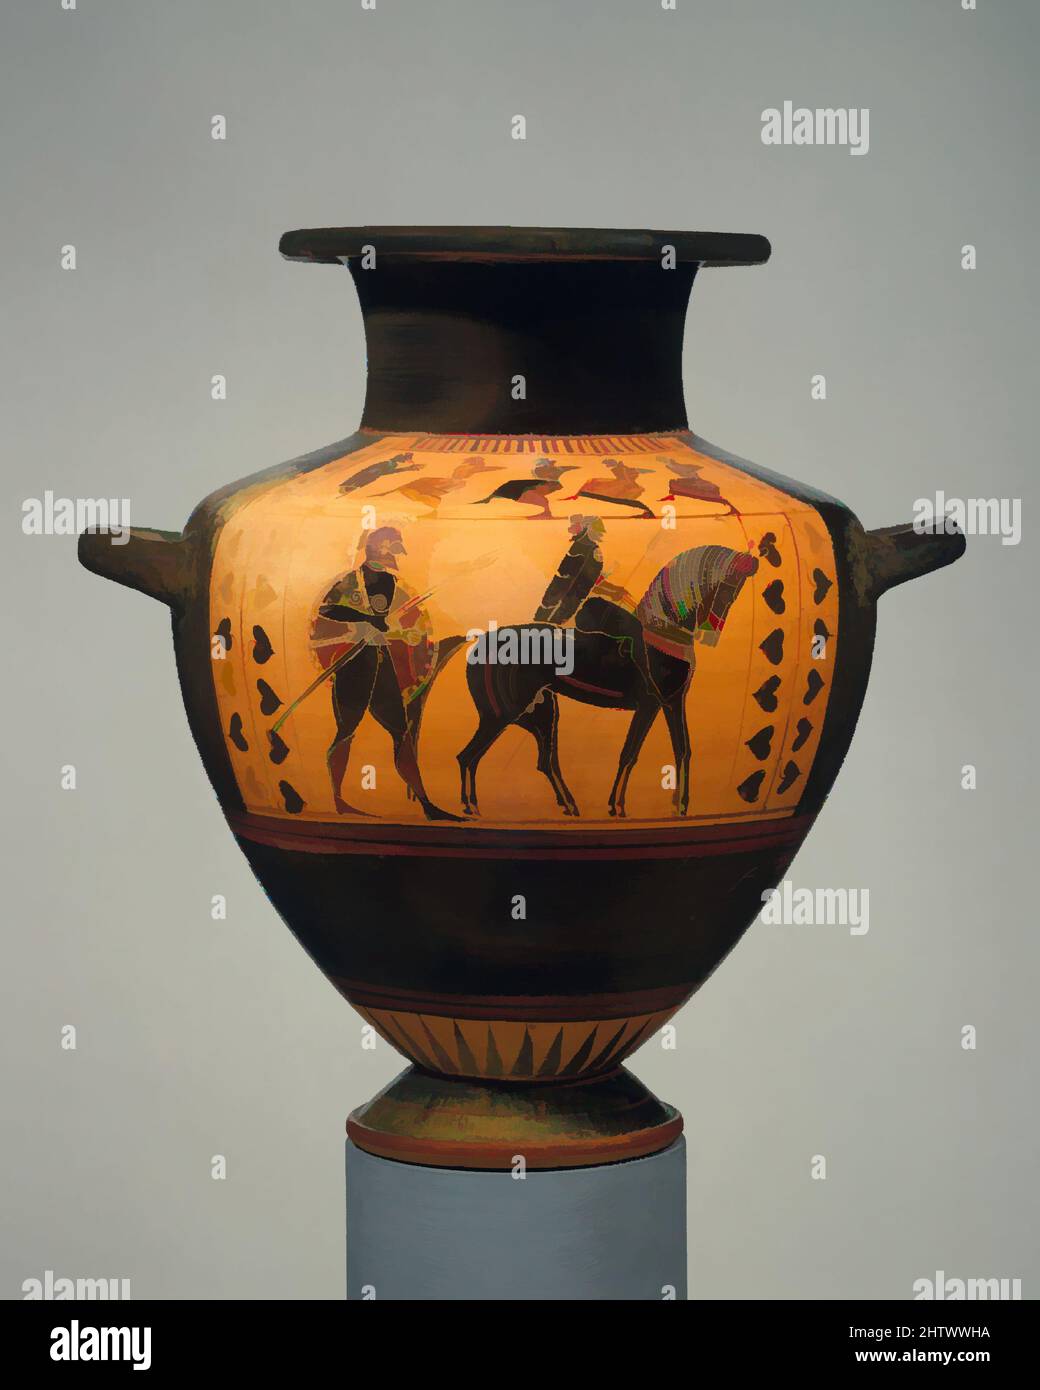 Art inspired by Terracotta hydria (water jar), Archaic, ca. 560 B.C., Greek, Attic, Terracotta; black-figure, Overall: 19 3/4 x 15 1/2in. (50.1 x 39.4cm), Vases, On the body, foot soldier and horseman, On the shoulder, chorus: flute player and dancers. This vase contributes to our, Classic works modernized by Artotop with a splash of modernity. Shapes, color and value, eye-catching visual impact on art. Emotions through freedom of artworks in a contemporary way. A timeless message pursuing a wildly creative new direction. Artists turning to the digital medium and creating the Artotop NFT Stock Photo